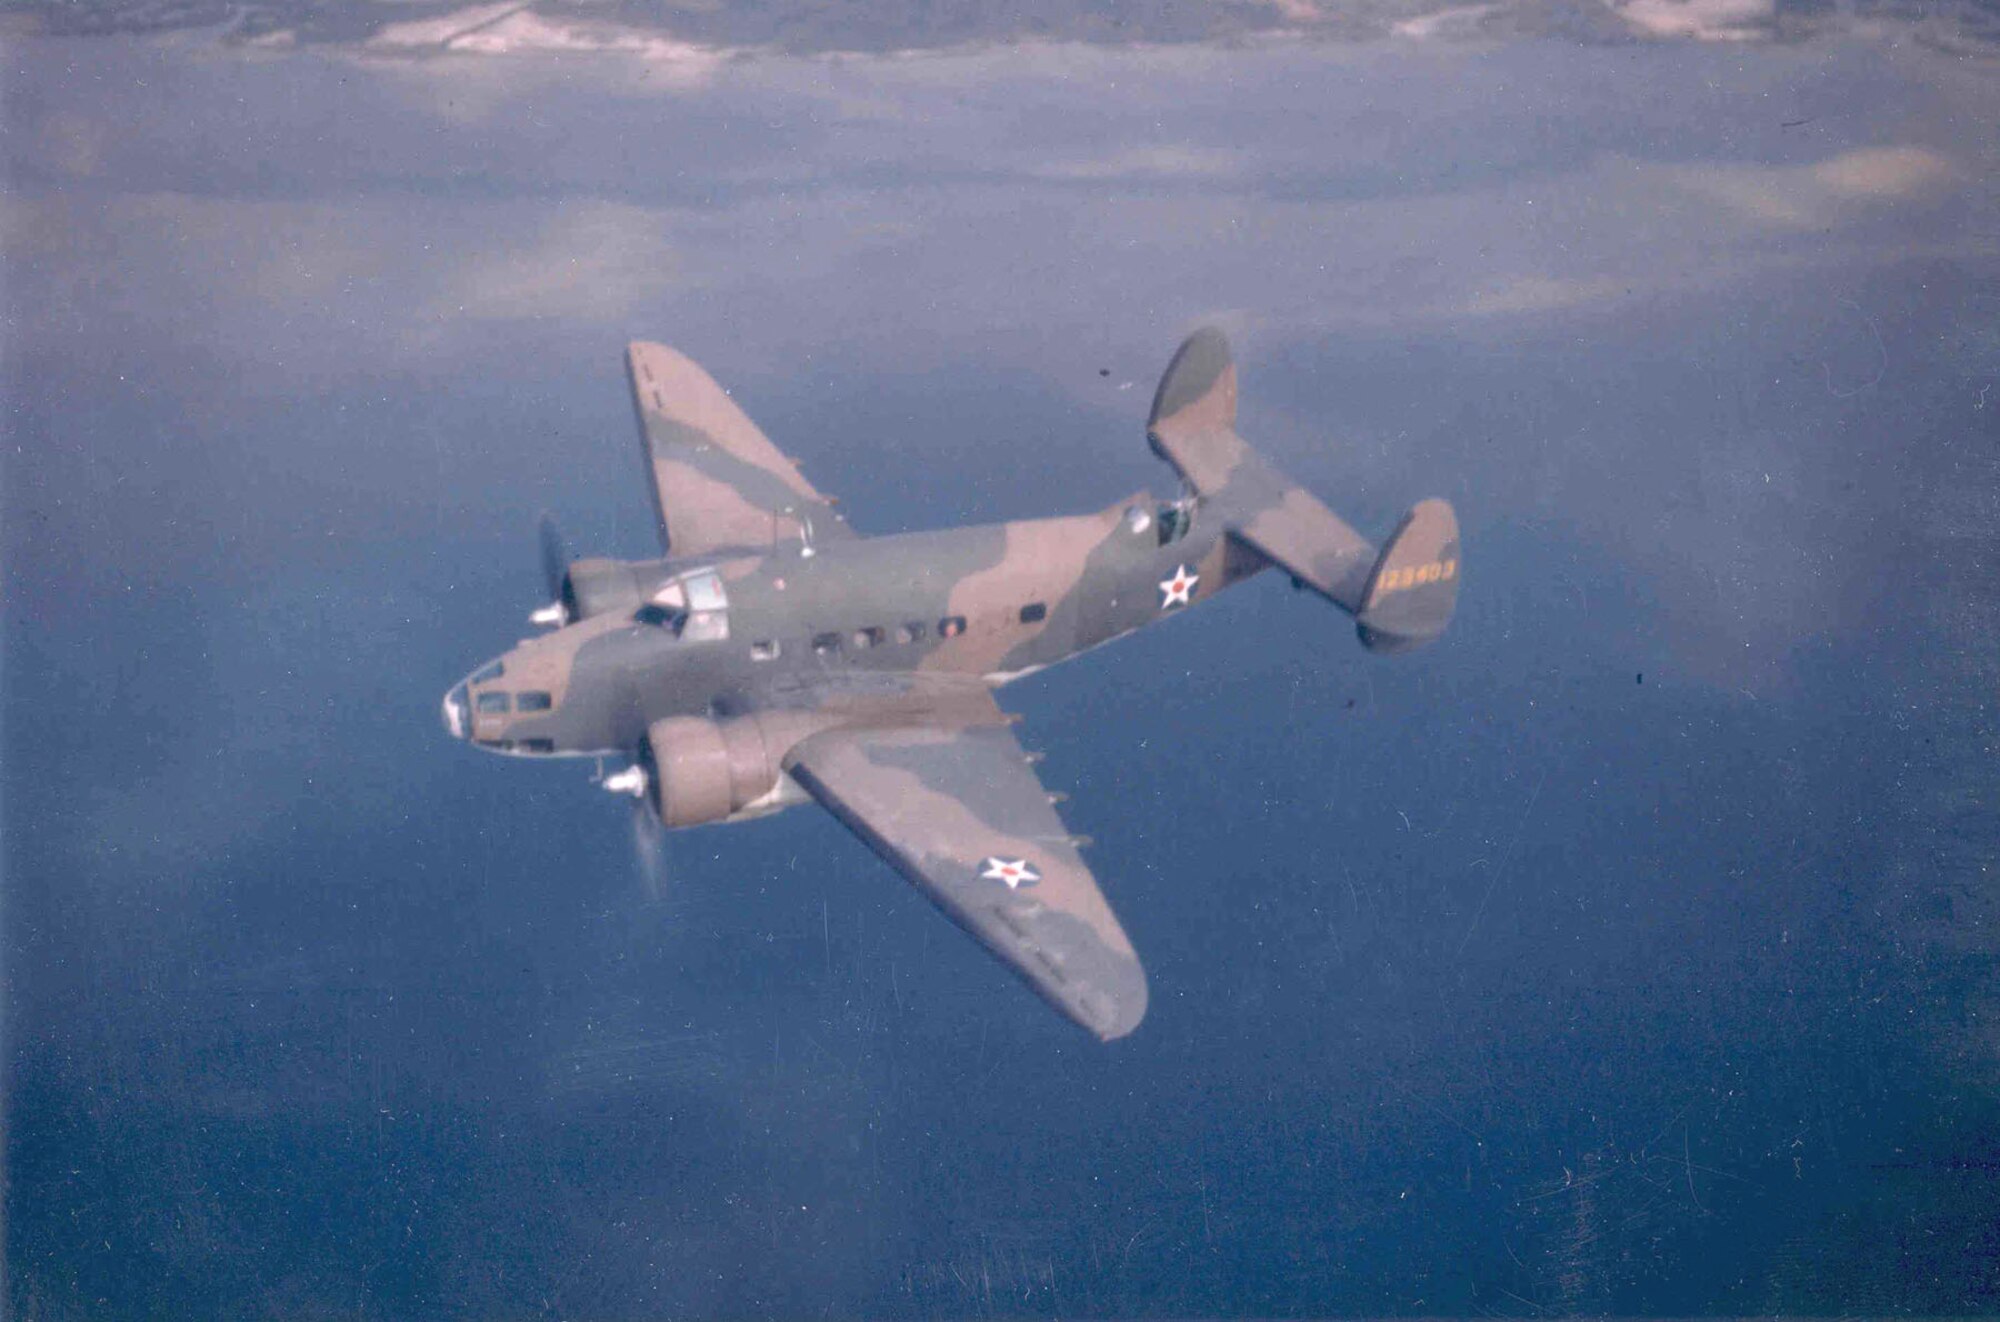 A U.S. Army Air Forces Lockheed A-29, serial number 41-23403, is seen here in flight over the ocean in this picture taken sometime in the early period of World War II.  The camouflage scheme and colors on this former Lend-Lease contracted aircraft are of British origin.  In May, 1942, instructions were issued to remove the red circle in the middle of the national insignia on all US aircraft.  (USAF Photo)